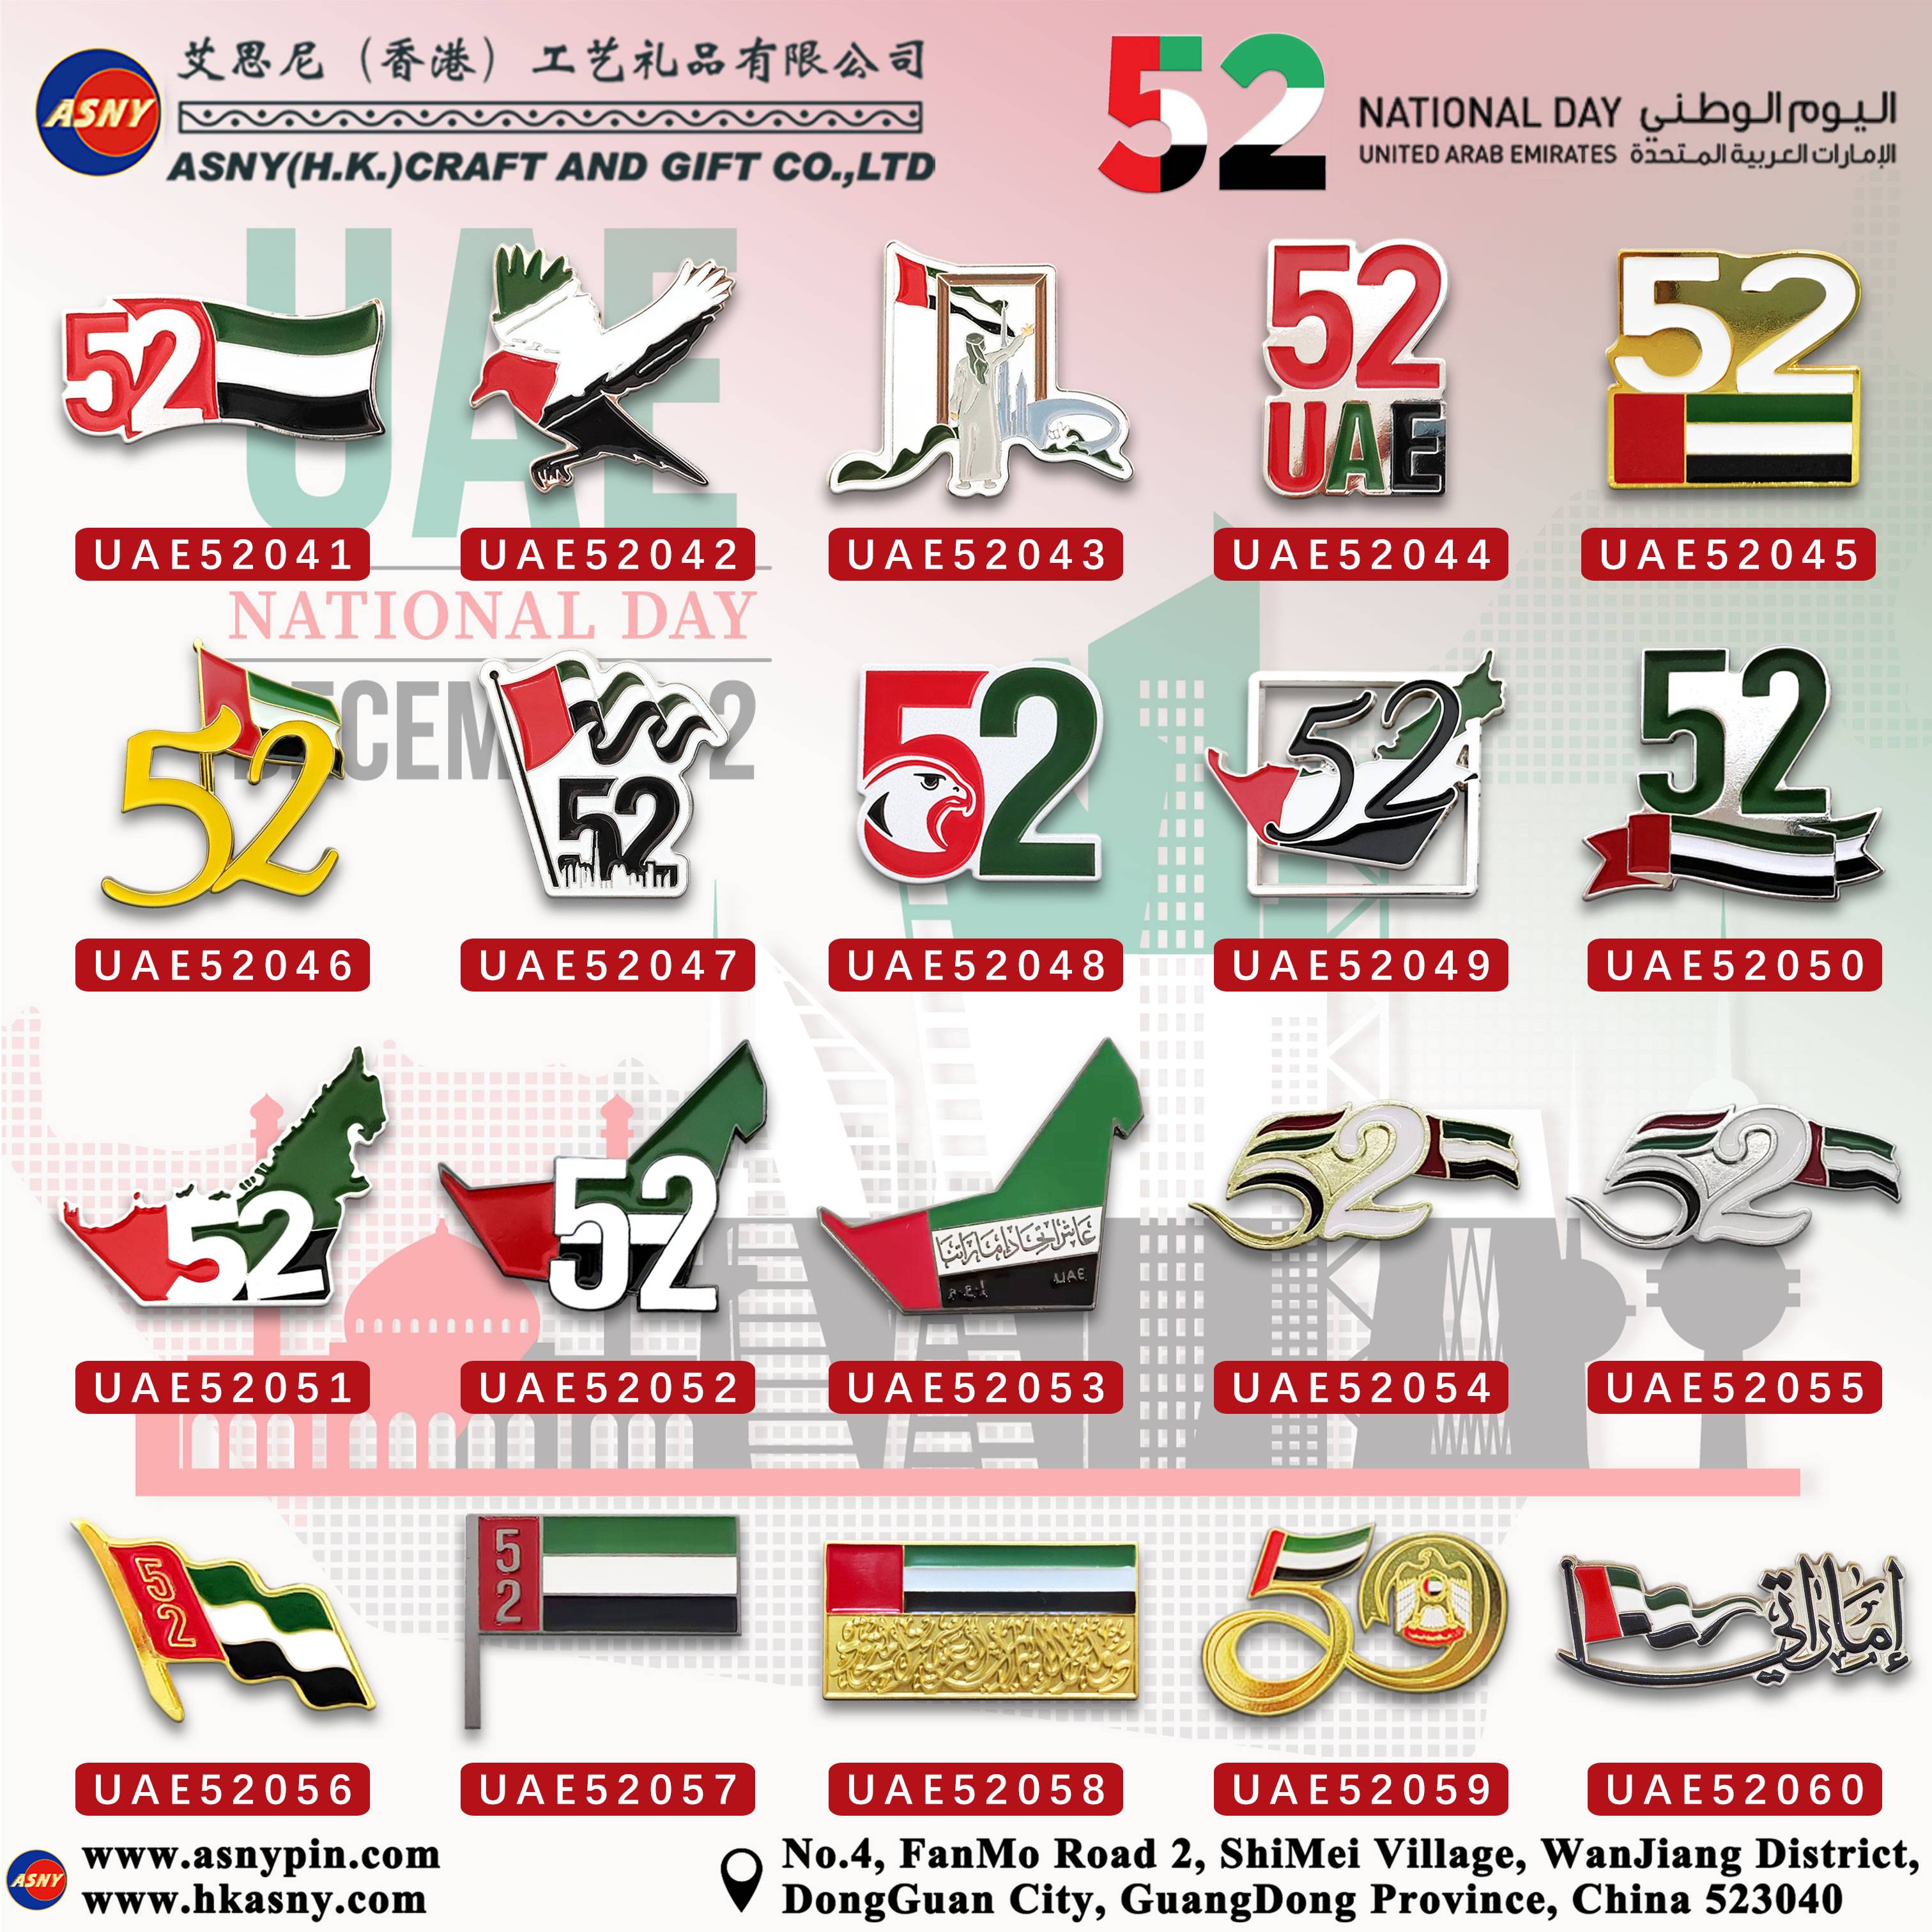 Catalog-UAE-52nd National Day-Souvenir-Craft-Promotional-Item-Price-Design-Customize-Production-Maker-Supply-Factory-4